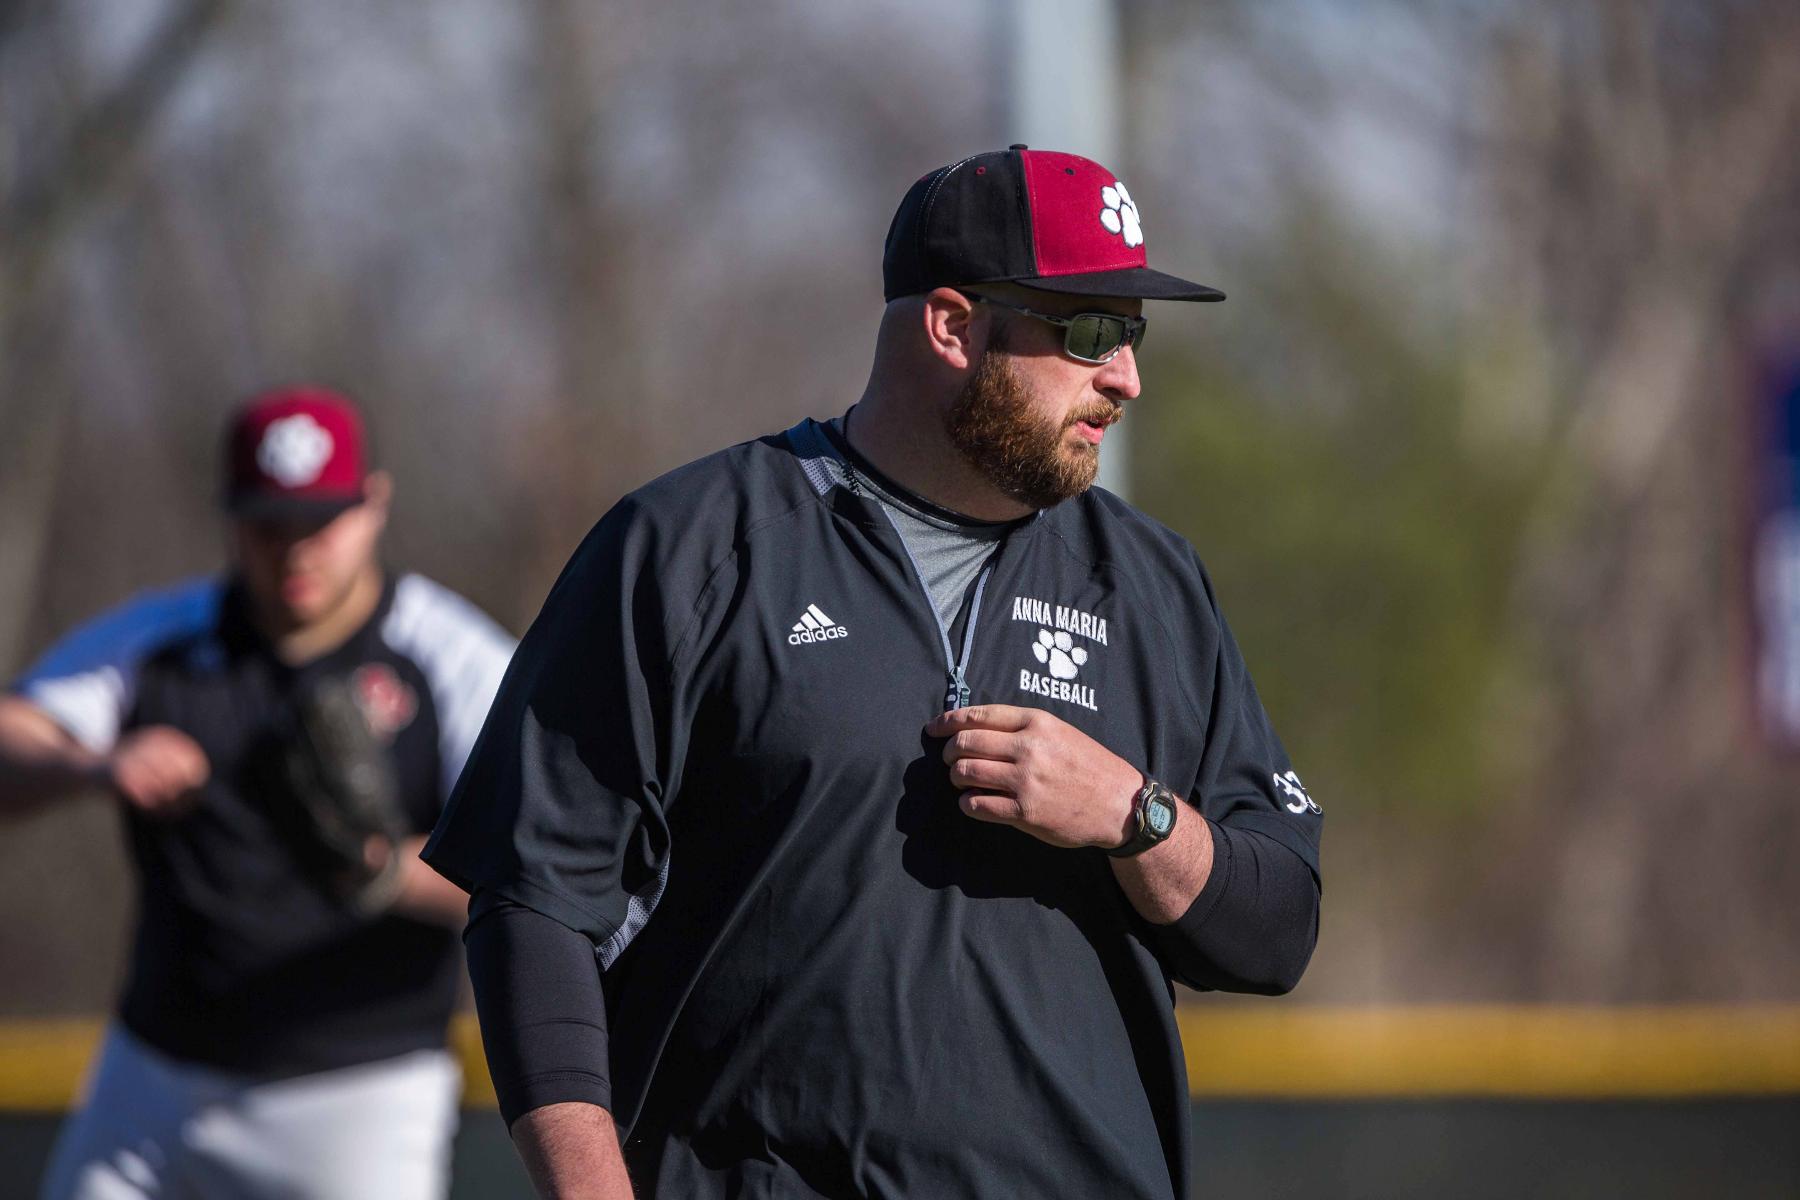 Youngstown Vindicator: Marsh settling in as Anna Maria College baseball coach